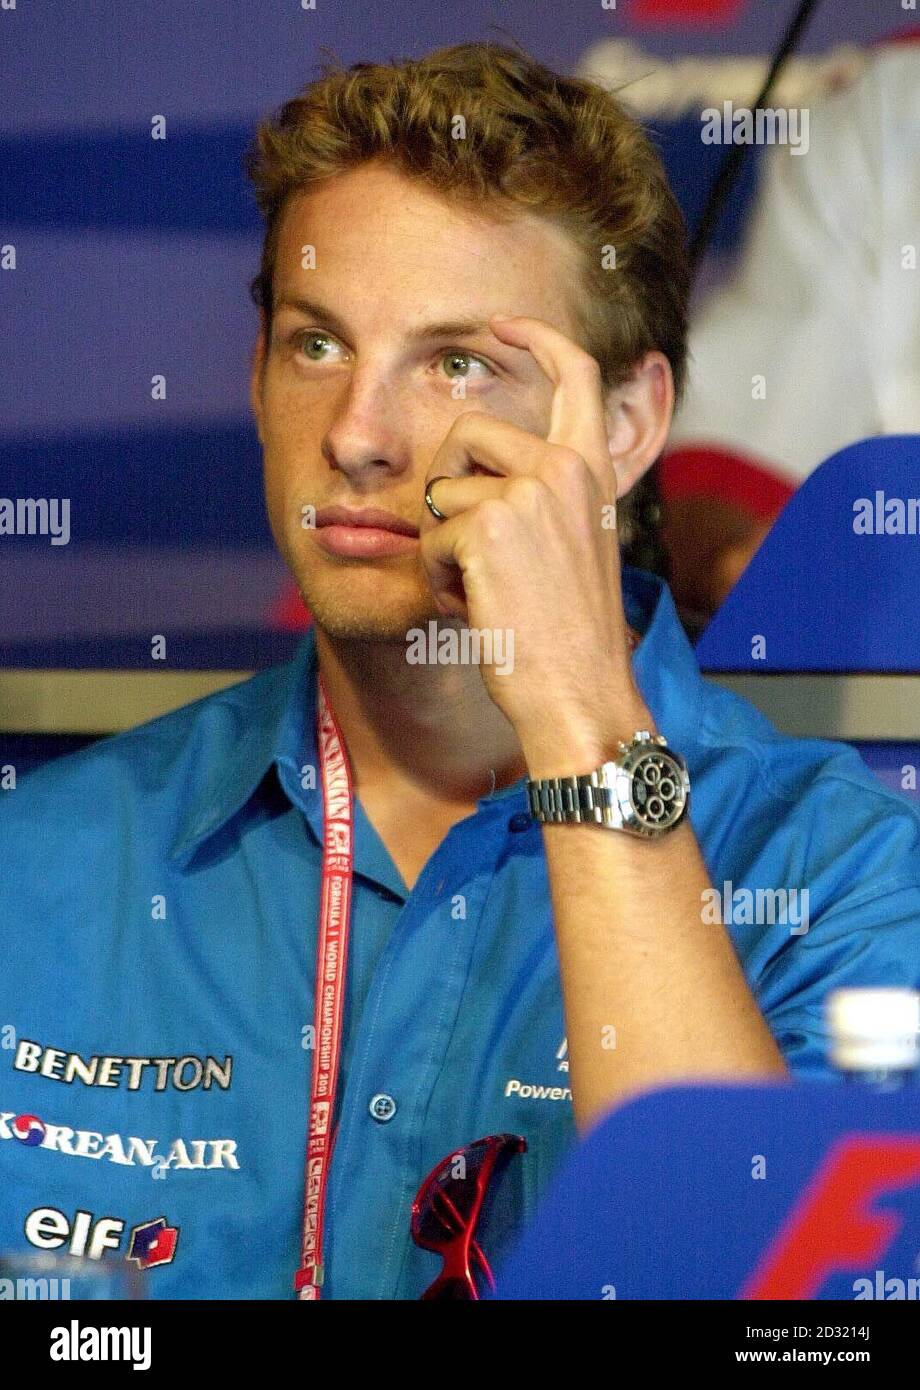 Benetton racing driver Jenson Button talks to the media during a press  conference at Silverstone Stock Photo - Alamy